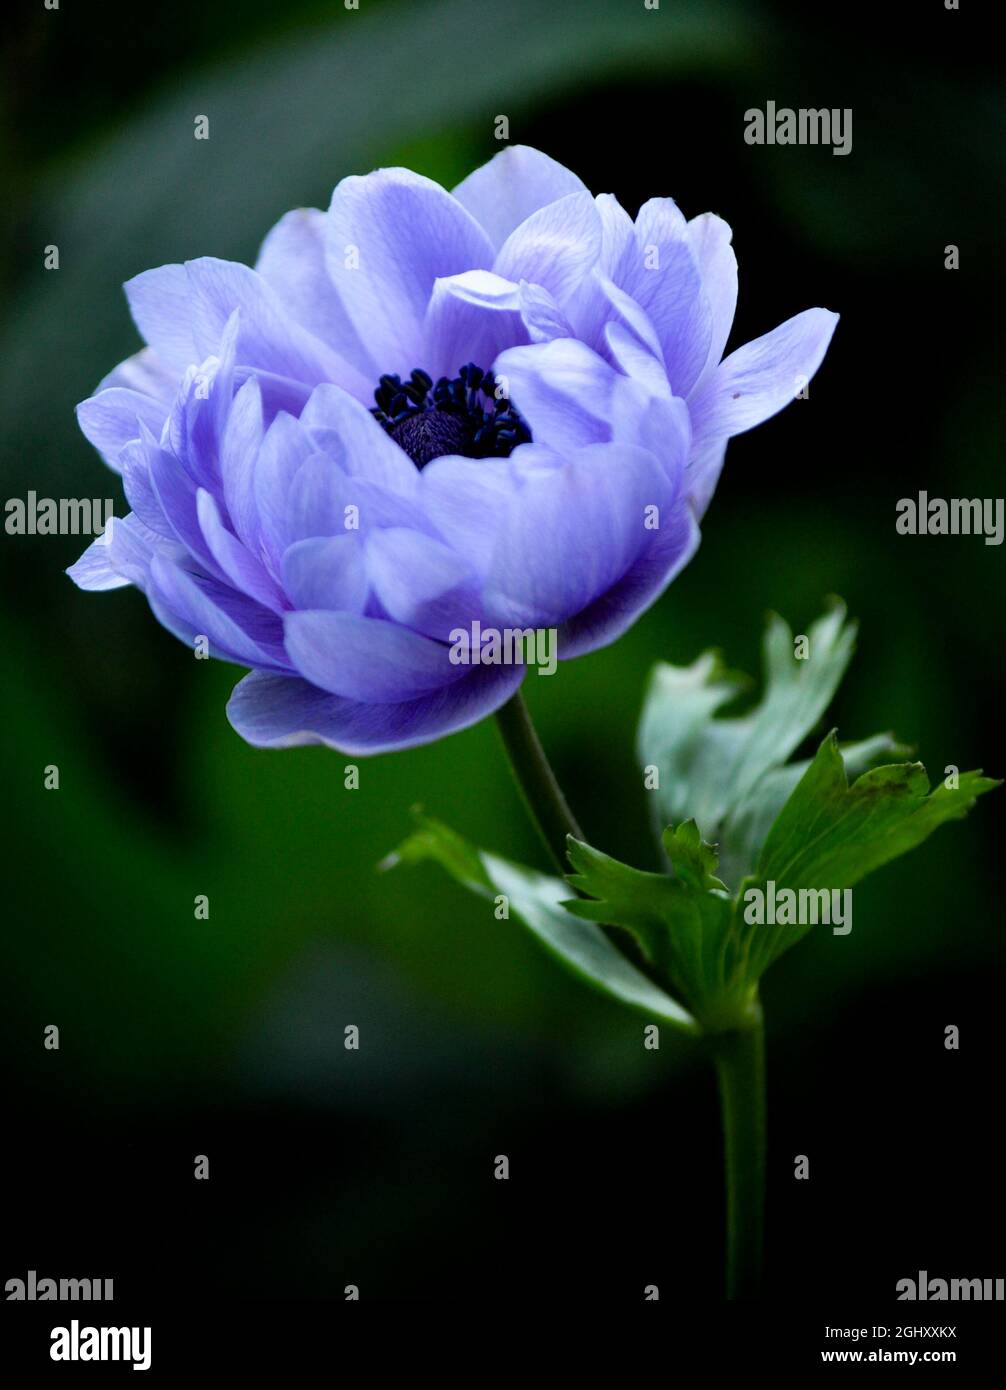 A single purple anemone flower (anemone coronaria) isolated against a dark green/black background Stock Photo